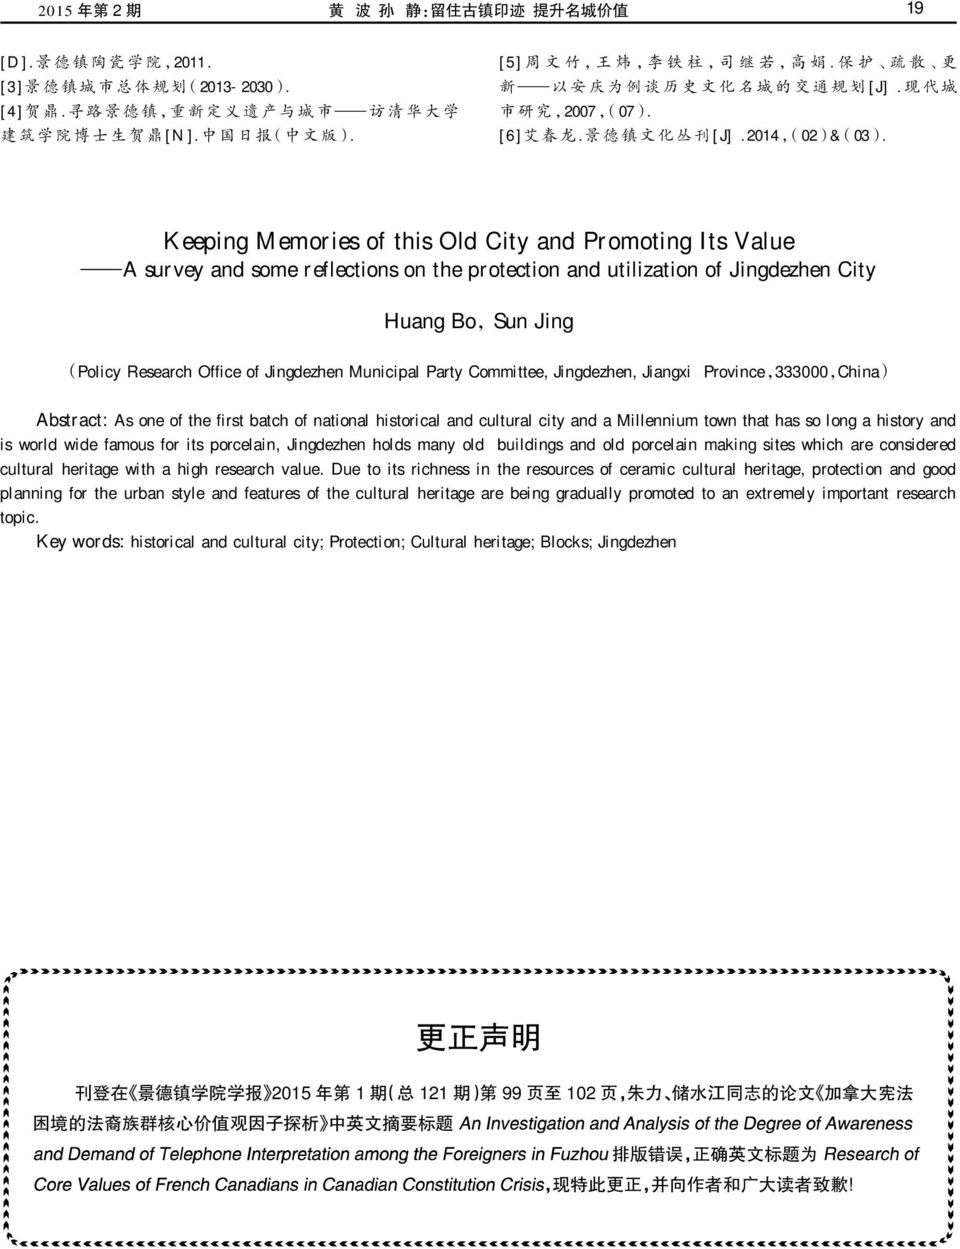 Keeping Memories of this Old City and Promoting Its Value A survey and some reflections on the protection and utilization of Jingdezhen City Huang Bo,Sun Jing (Policy Research Office of Jingdezhen